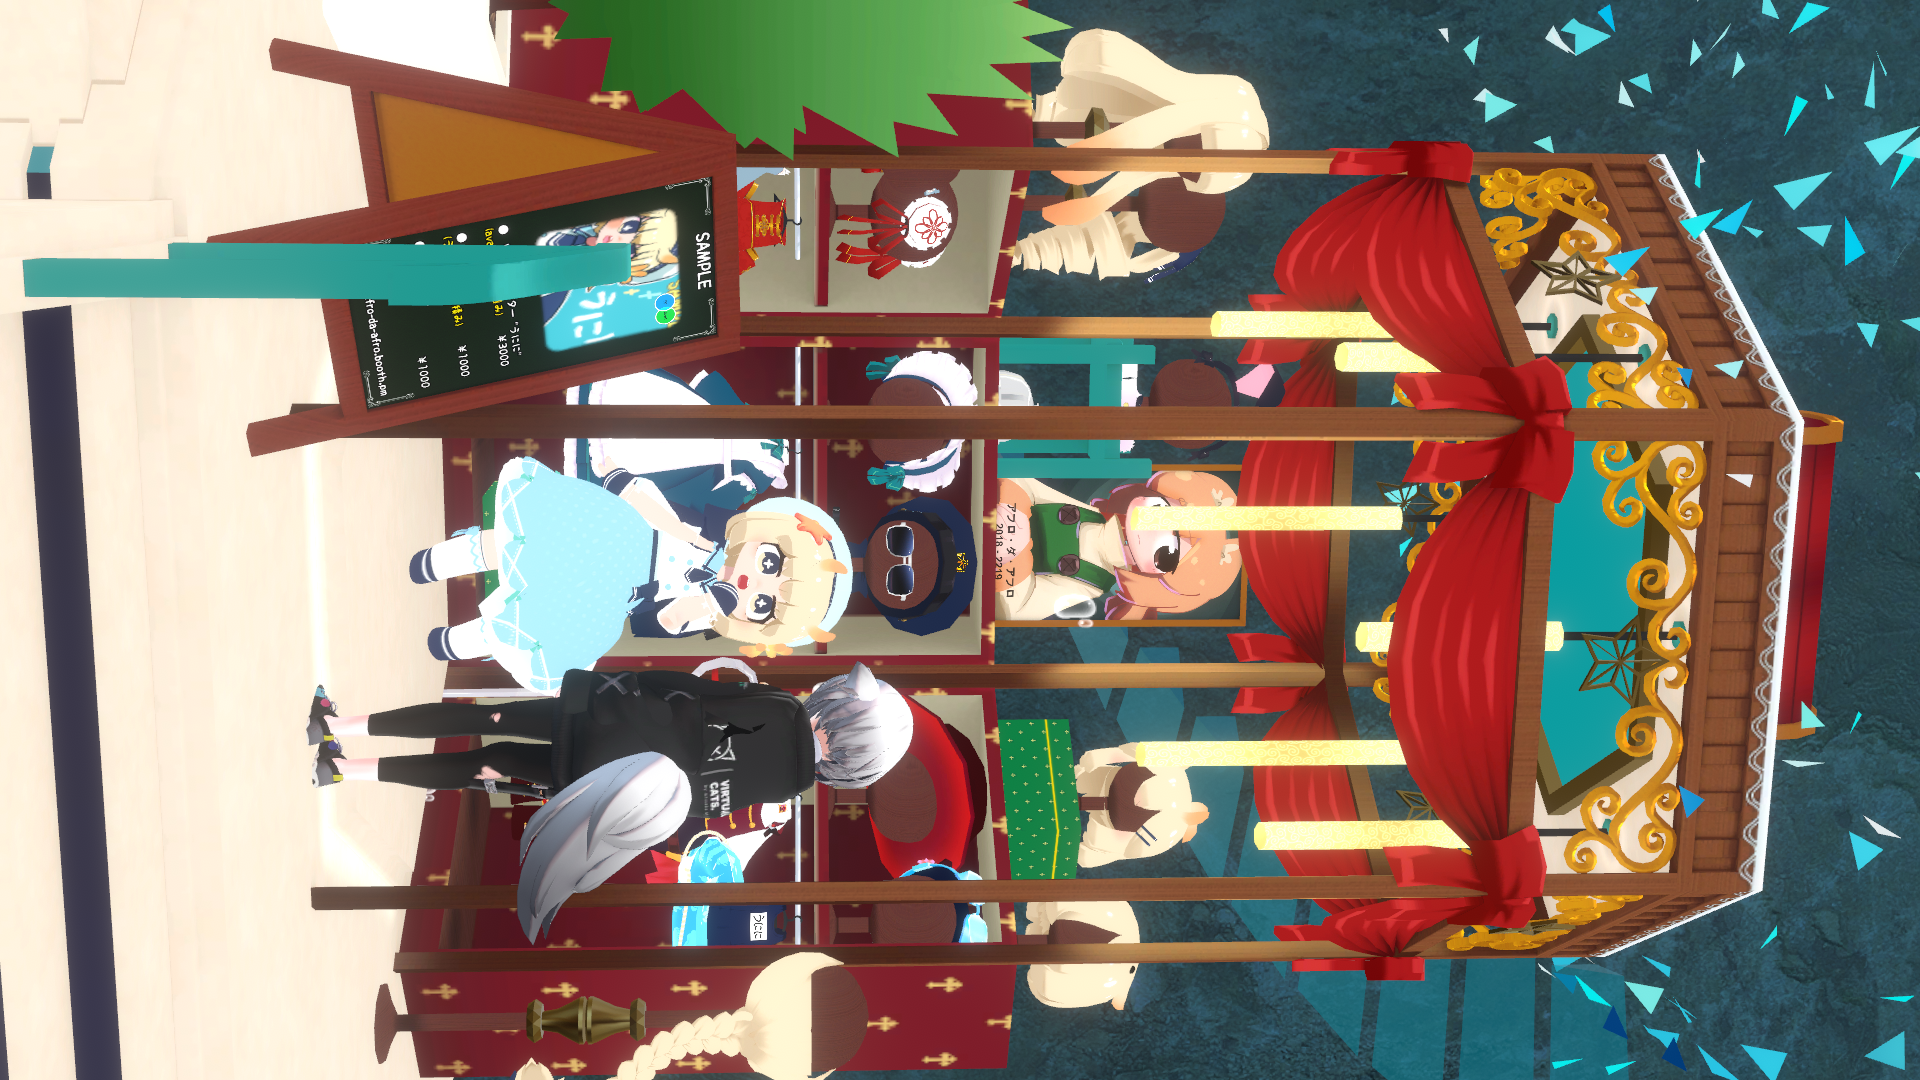 VRChat_1920x1080_2021-12-05_03-55-09.163.png